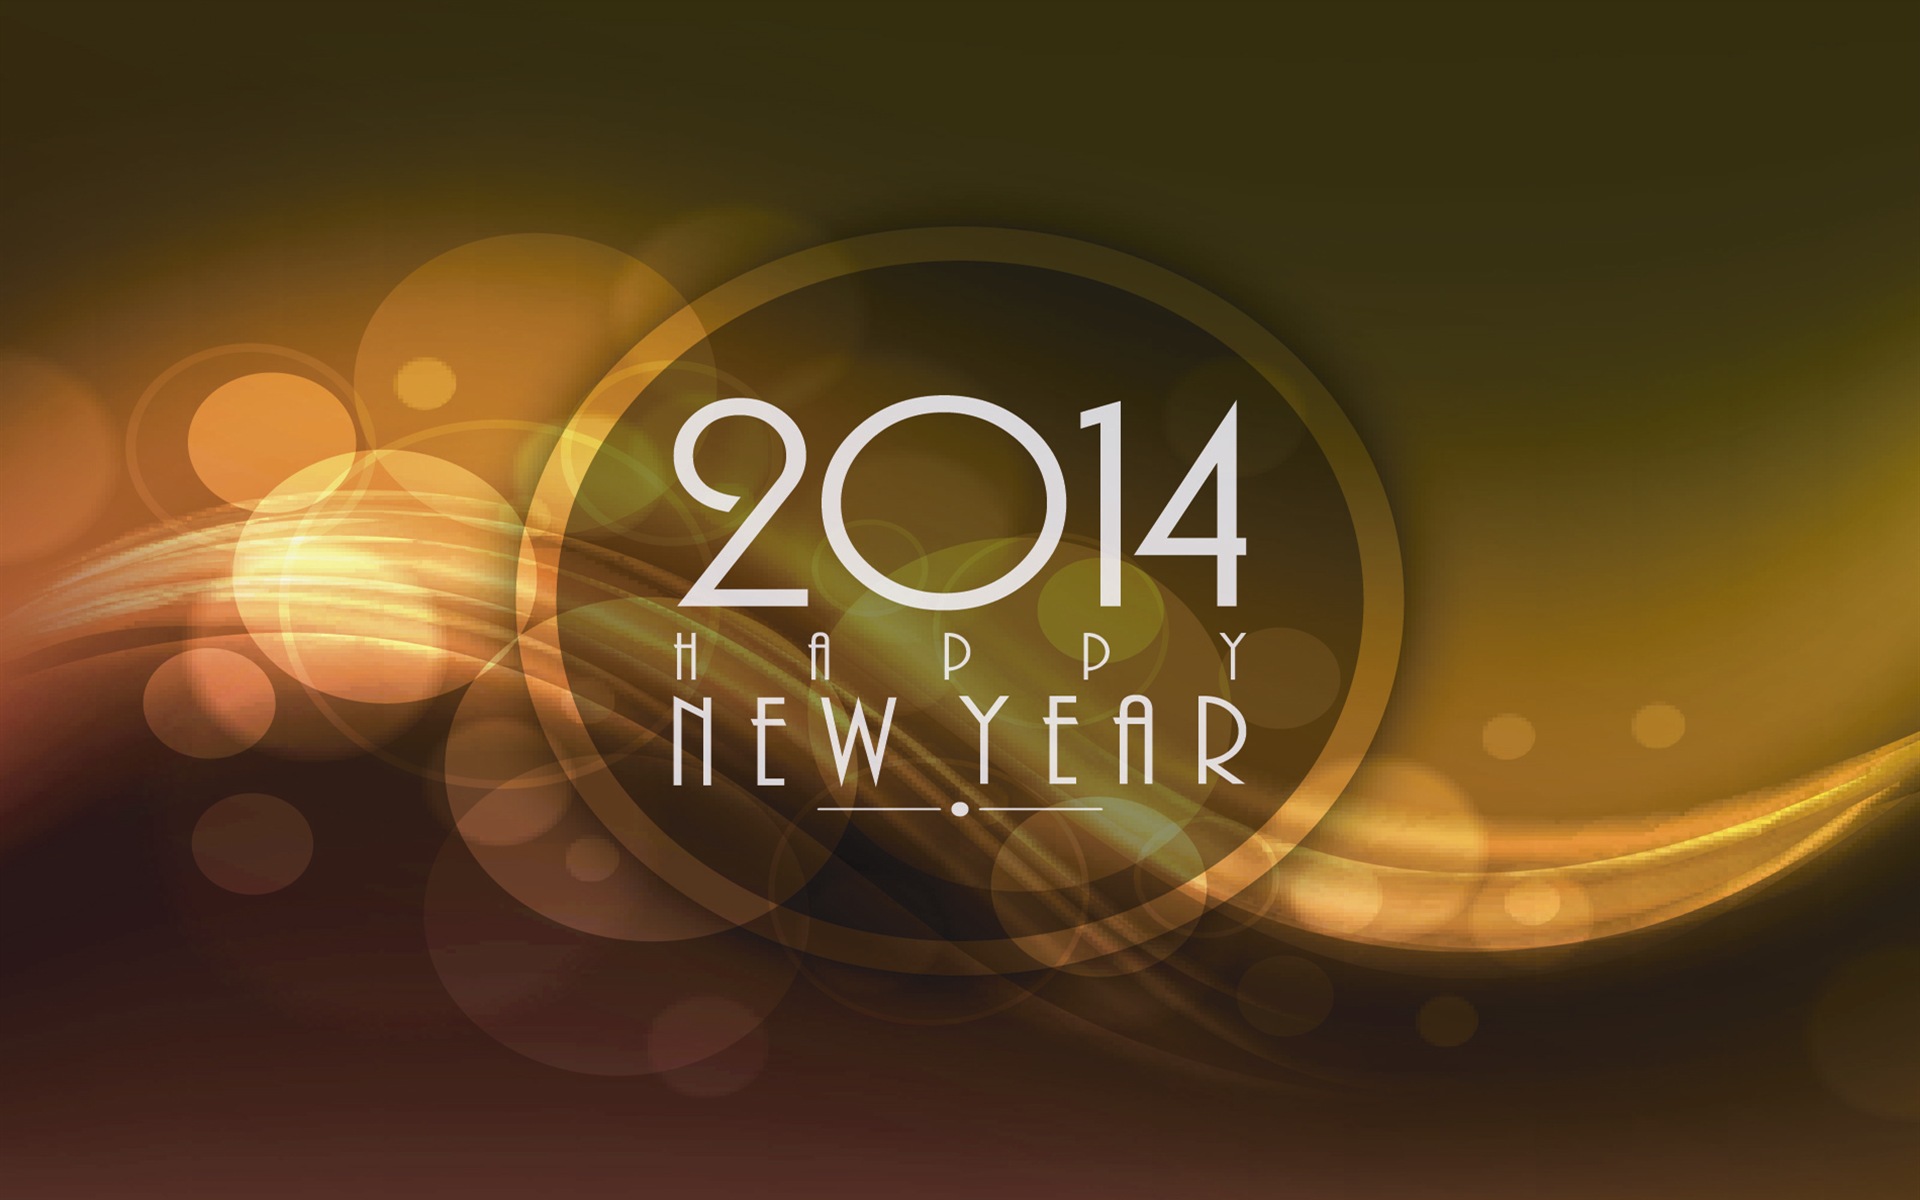 2014 New Year Theme HD Wallpapers (1) #4 - 1920x1200